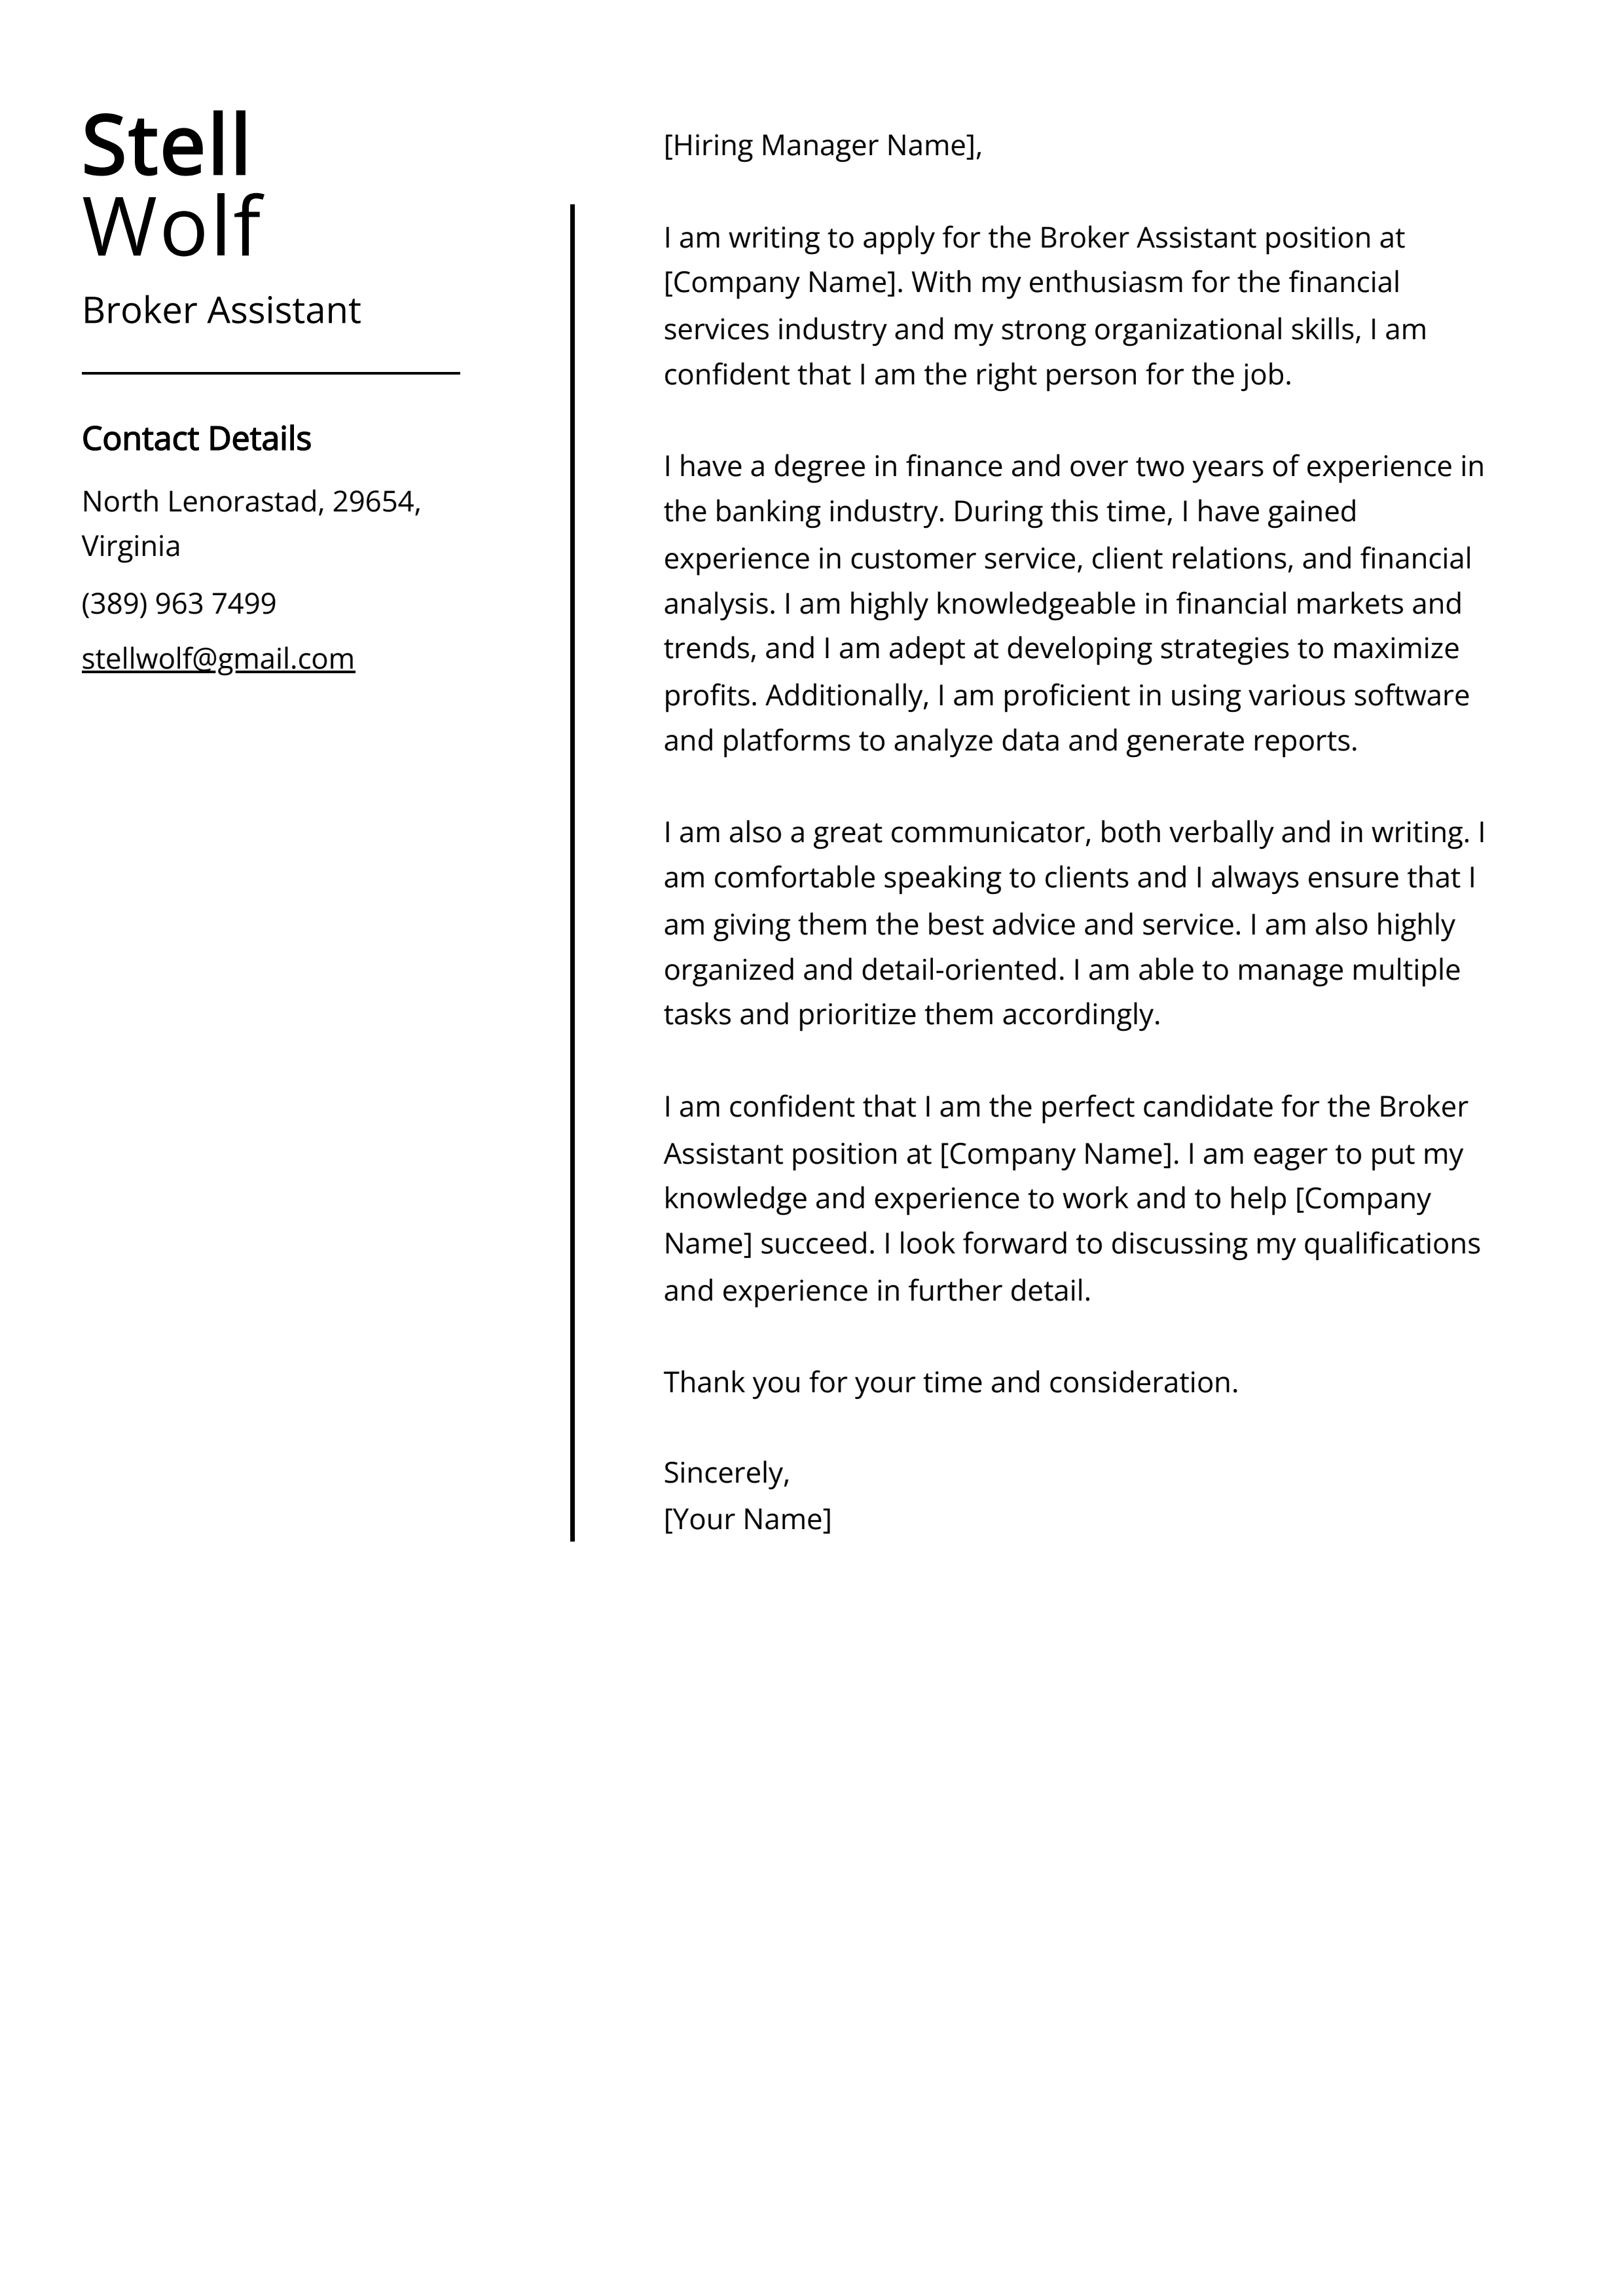 Broker Assistant Cover Letter Example